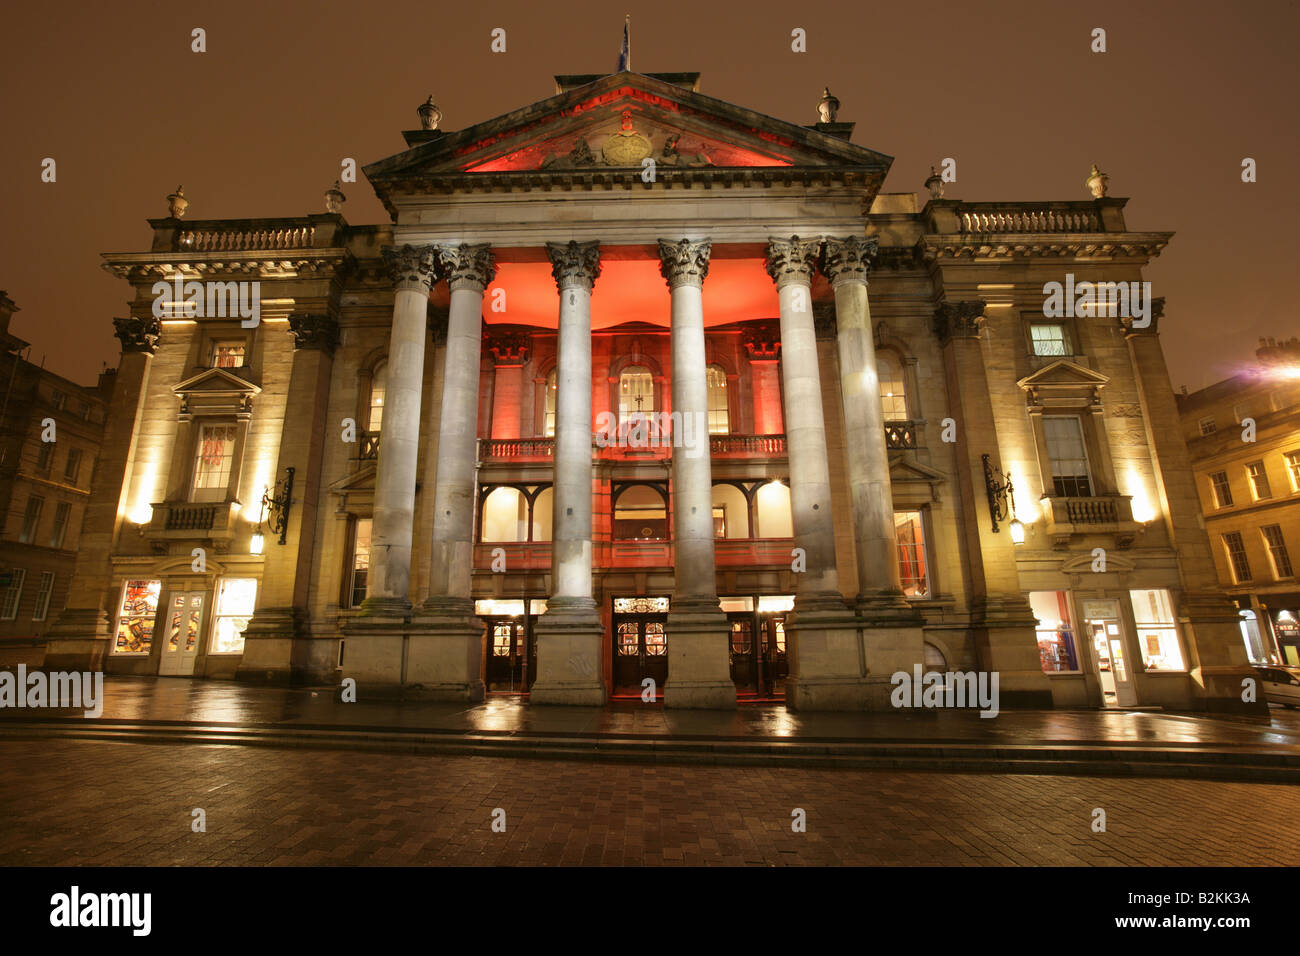 City of Newcastle, England. The Theatre Royal on Grey Street was designed by John and Benjamin Green and was completed in 1837. Stock Photo